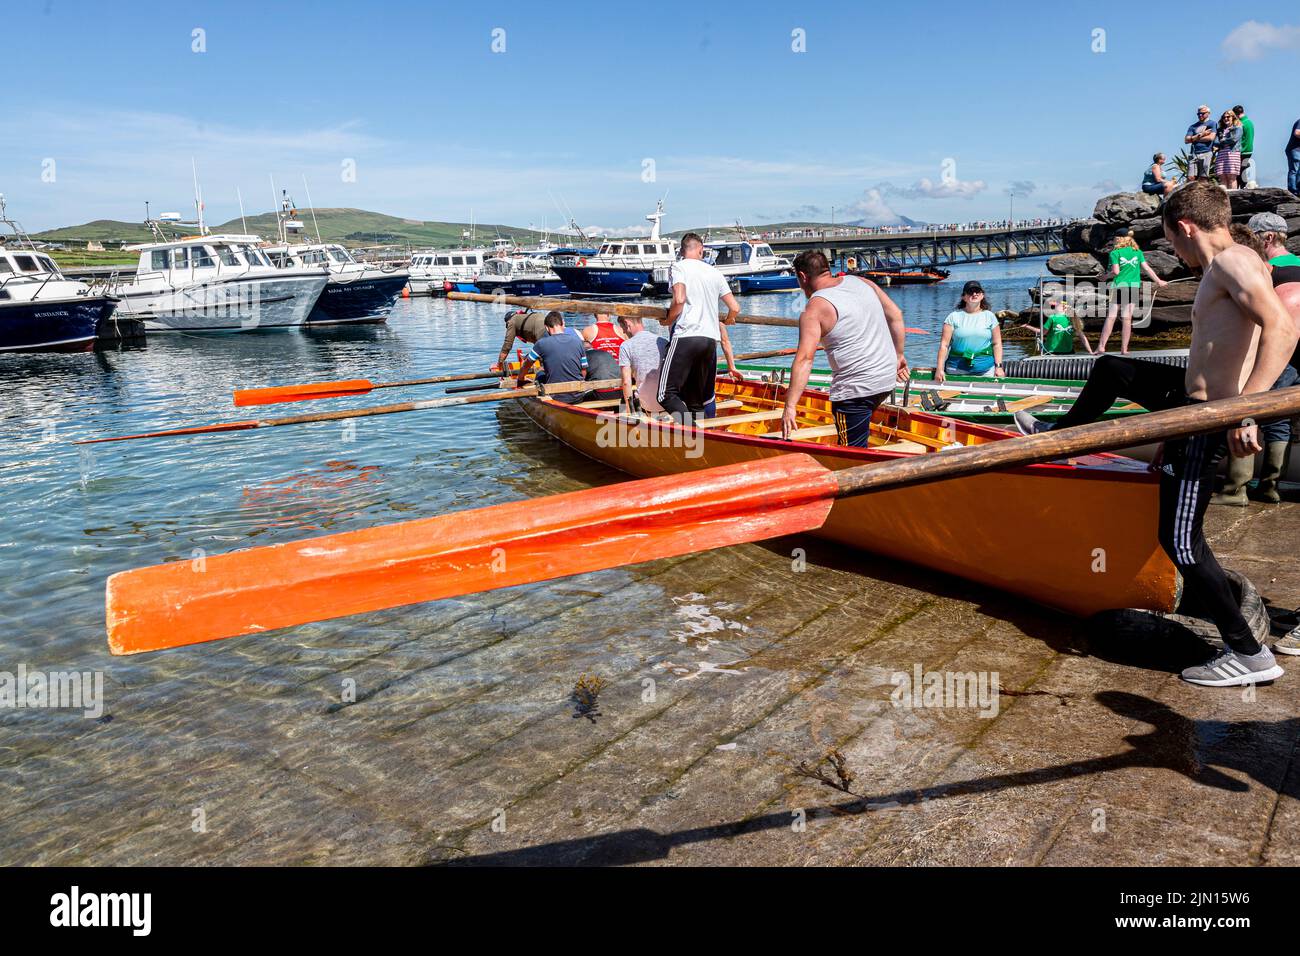 Seine Boat, traditional long fishing boat from County Kerry, at Portmagee Regatta Stock Photo